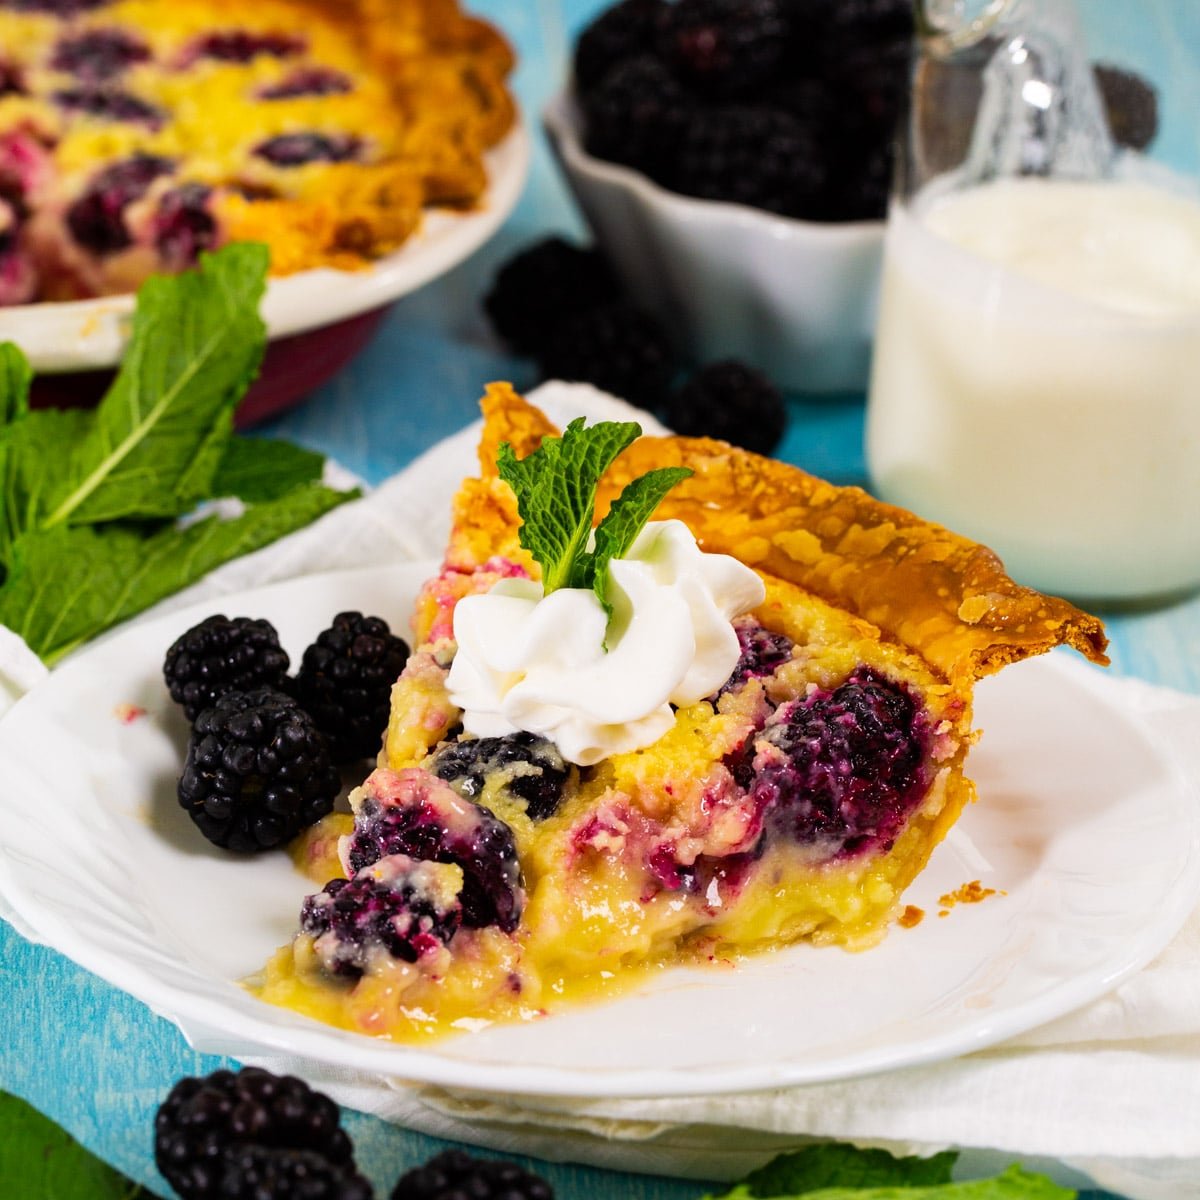 Slice of Blackberry Buttermilk Pie topped with whipped cream.